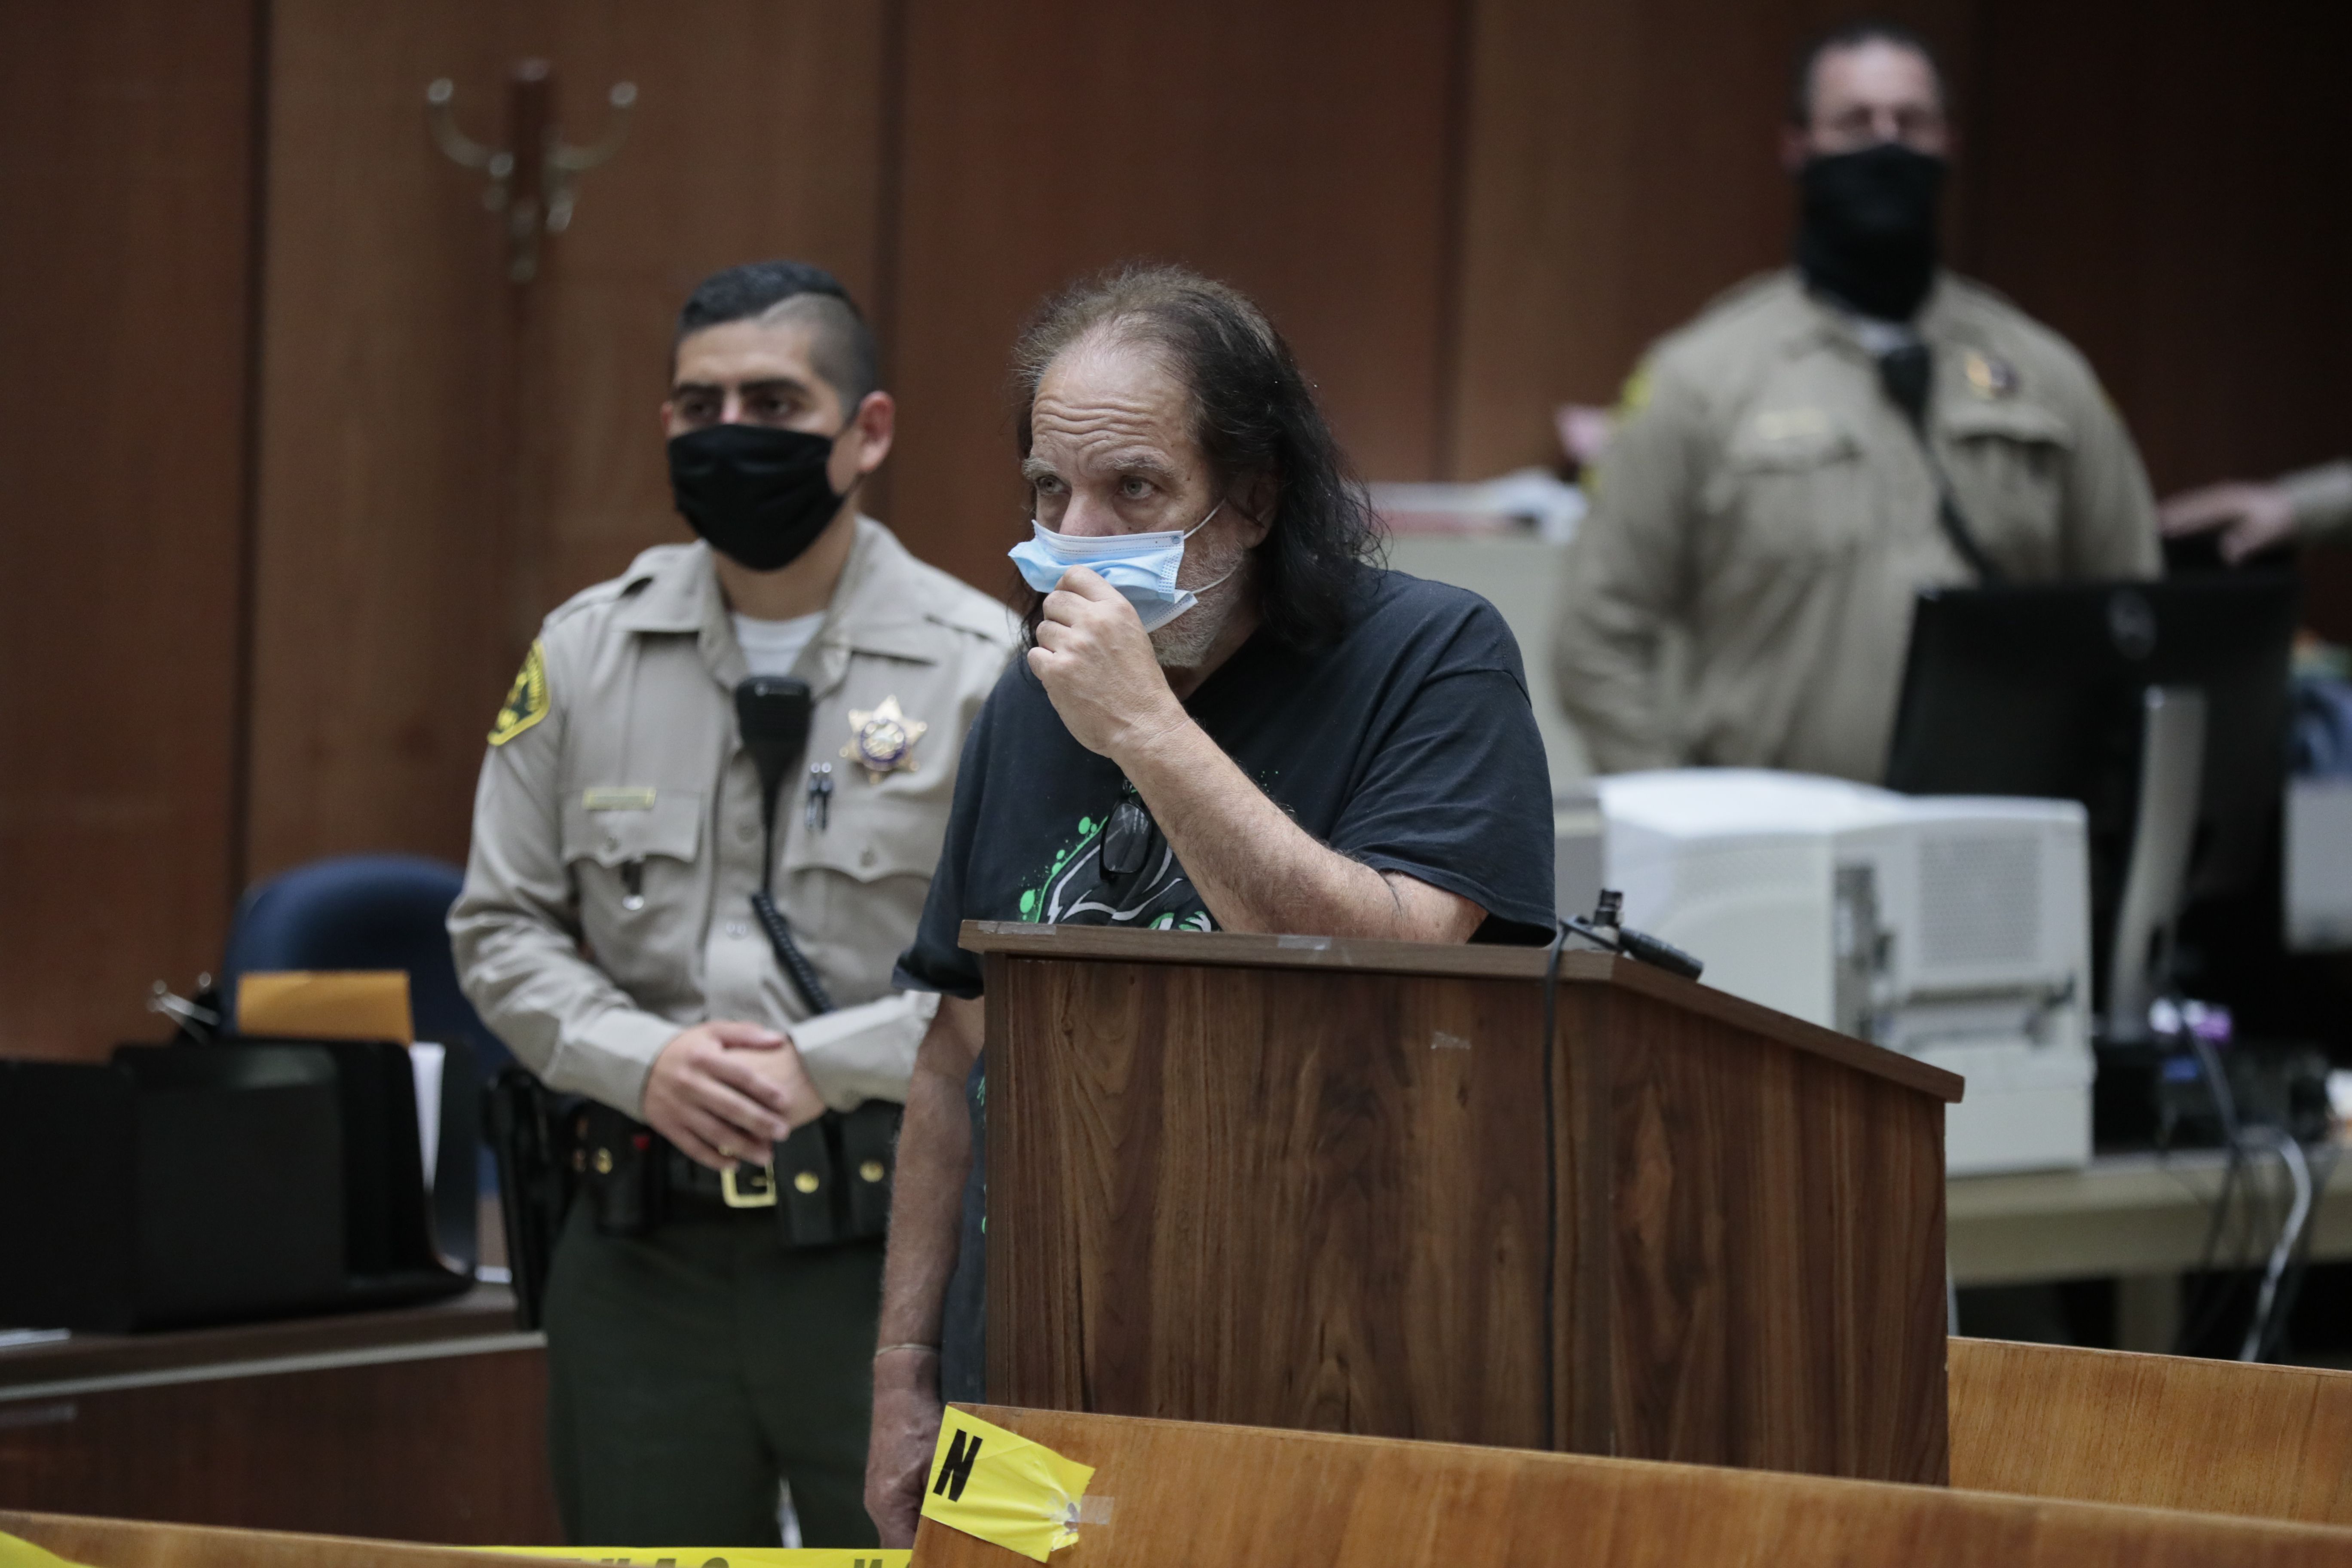 Adult film star Ron Jeremy (C) makes his first appearance in downtown Los Angeles Criminal Court, June 23, 2020. - Adult film star Ron Jeremy has been charged with raping three women and sexually assaulting a fourth, Los Angeles prosecutors said Tuesday. (Photo by ROBERT GAUTHIER/POOL/AFP via Getty Images)